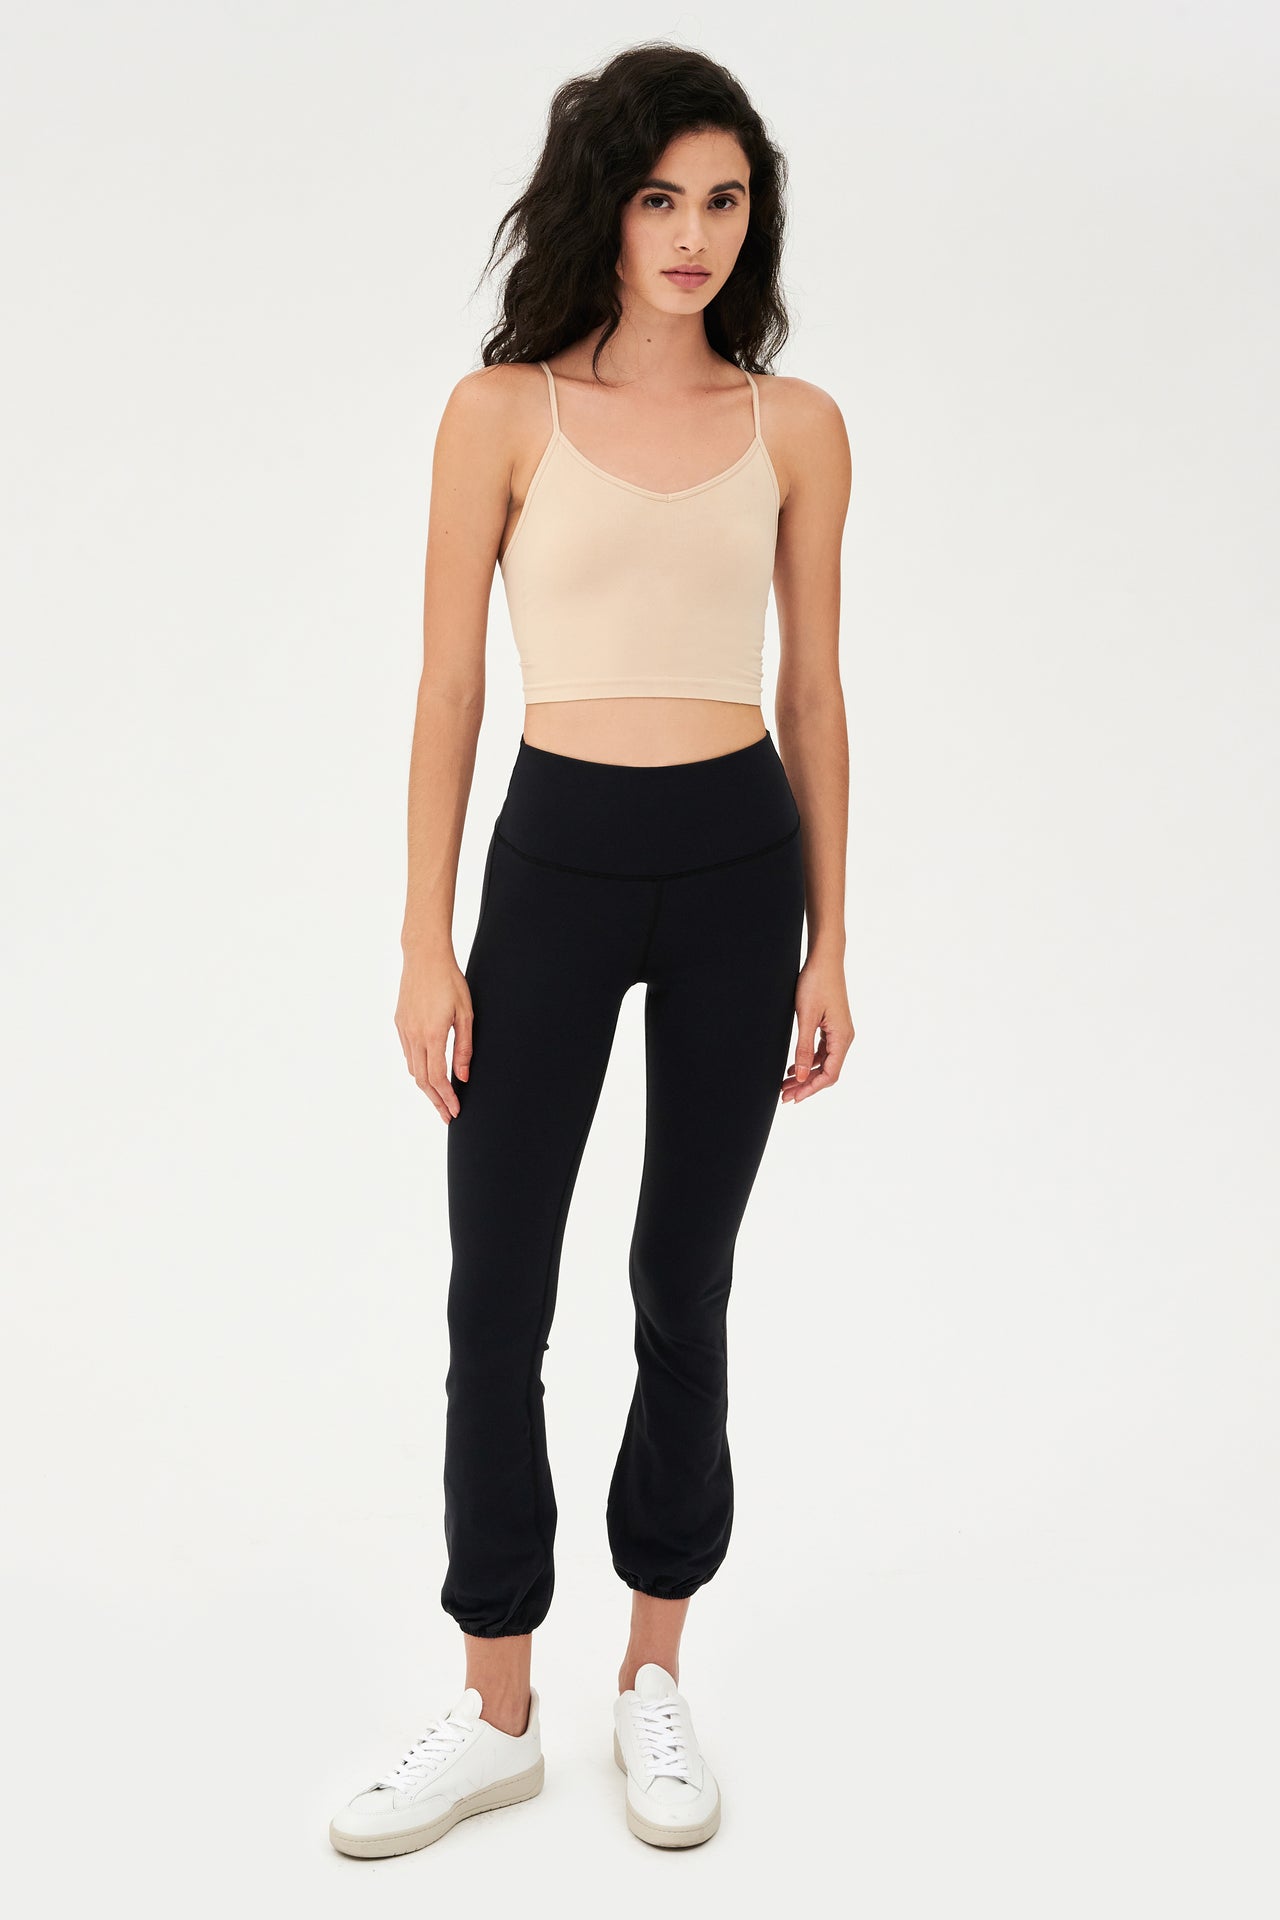 The model is wearing a black crop top and SPLITS59 Icon High Waist Supplex Legging - Black.